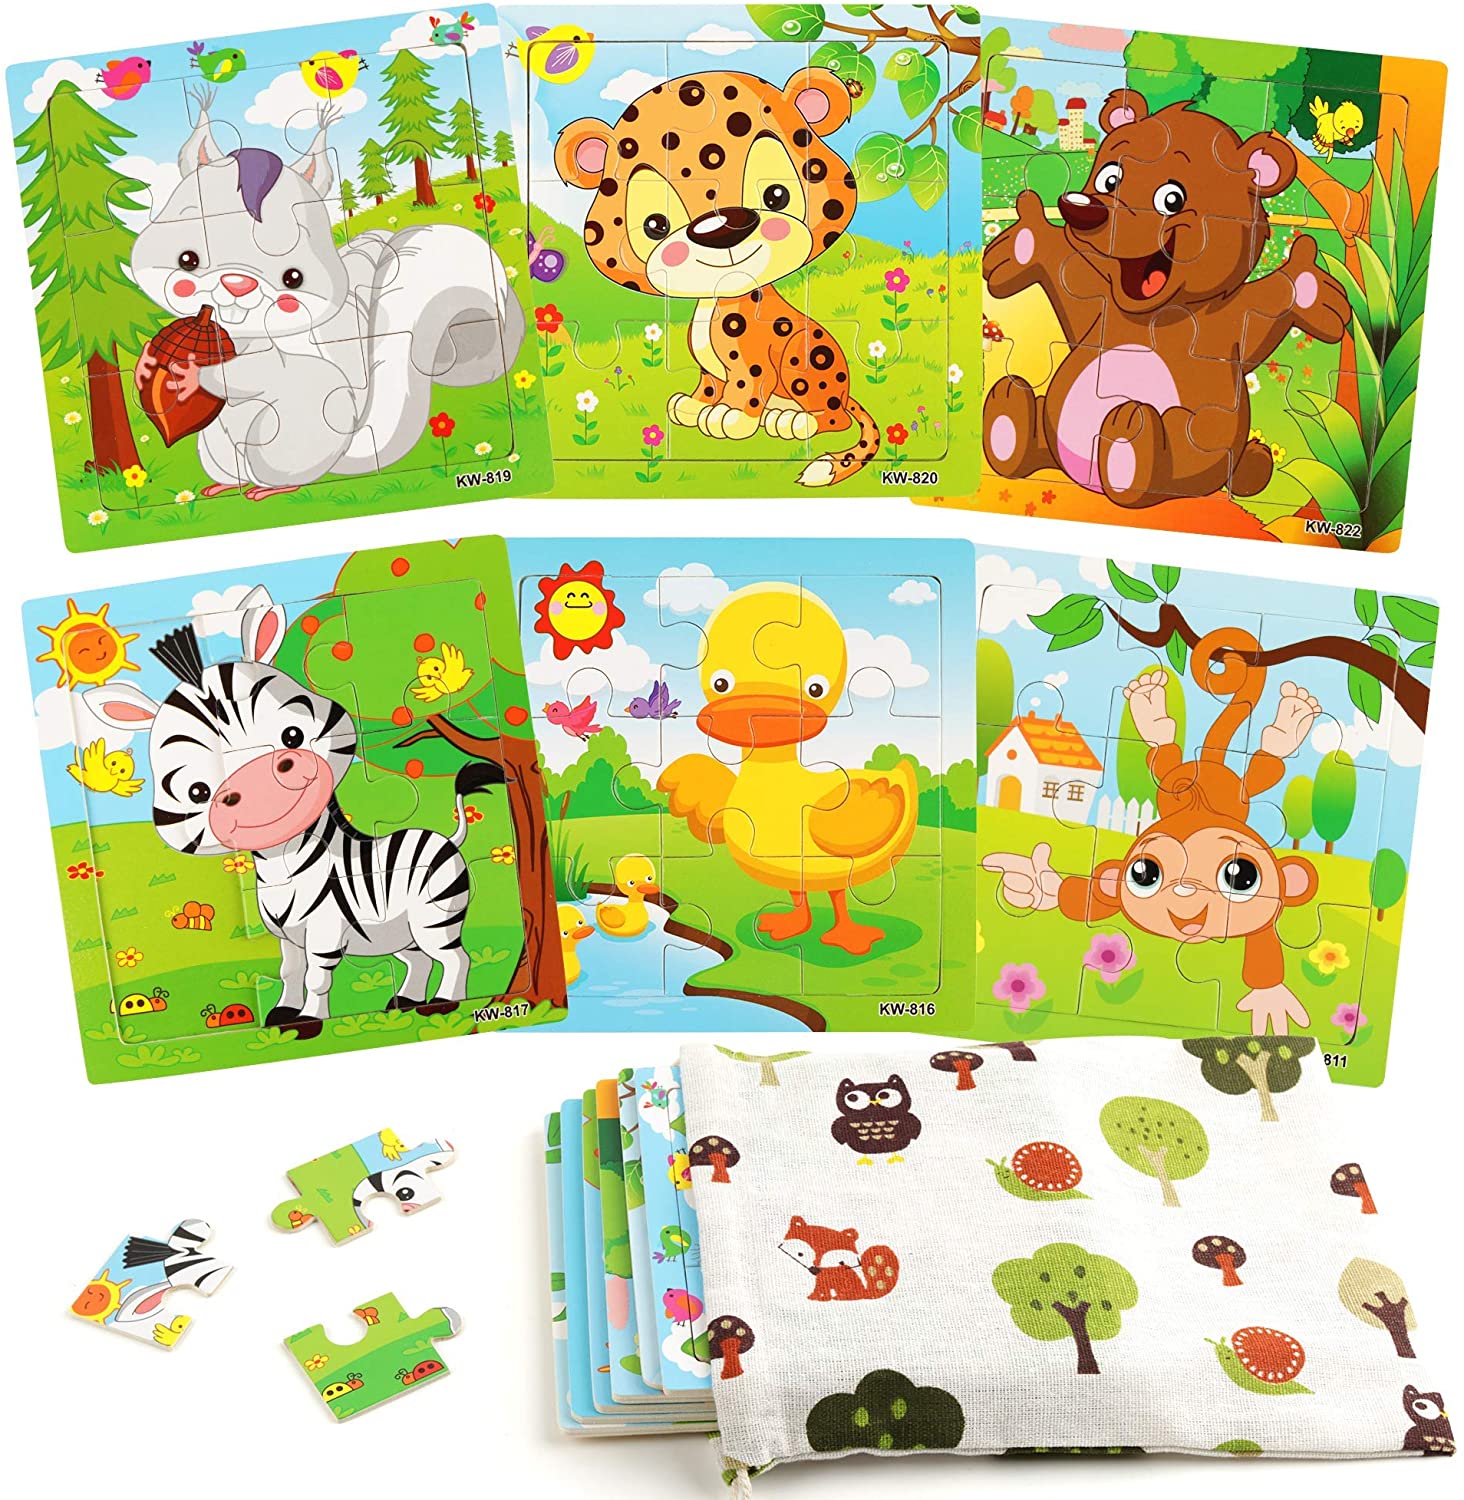 Wooden Puzzles for 1 2 3 Year Olds 6 Pack Wooden Jigsaw Puzzles Set for 